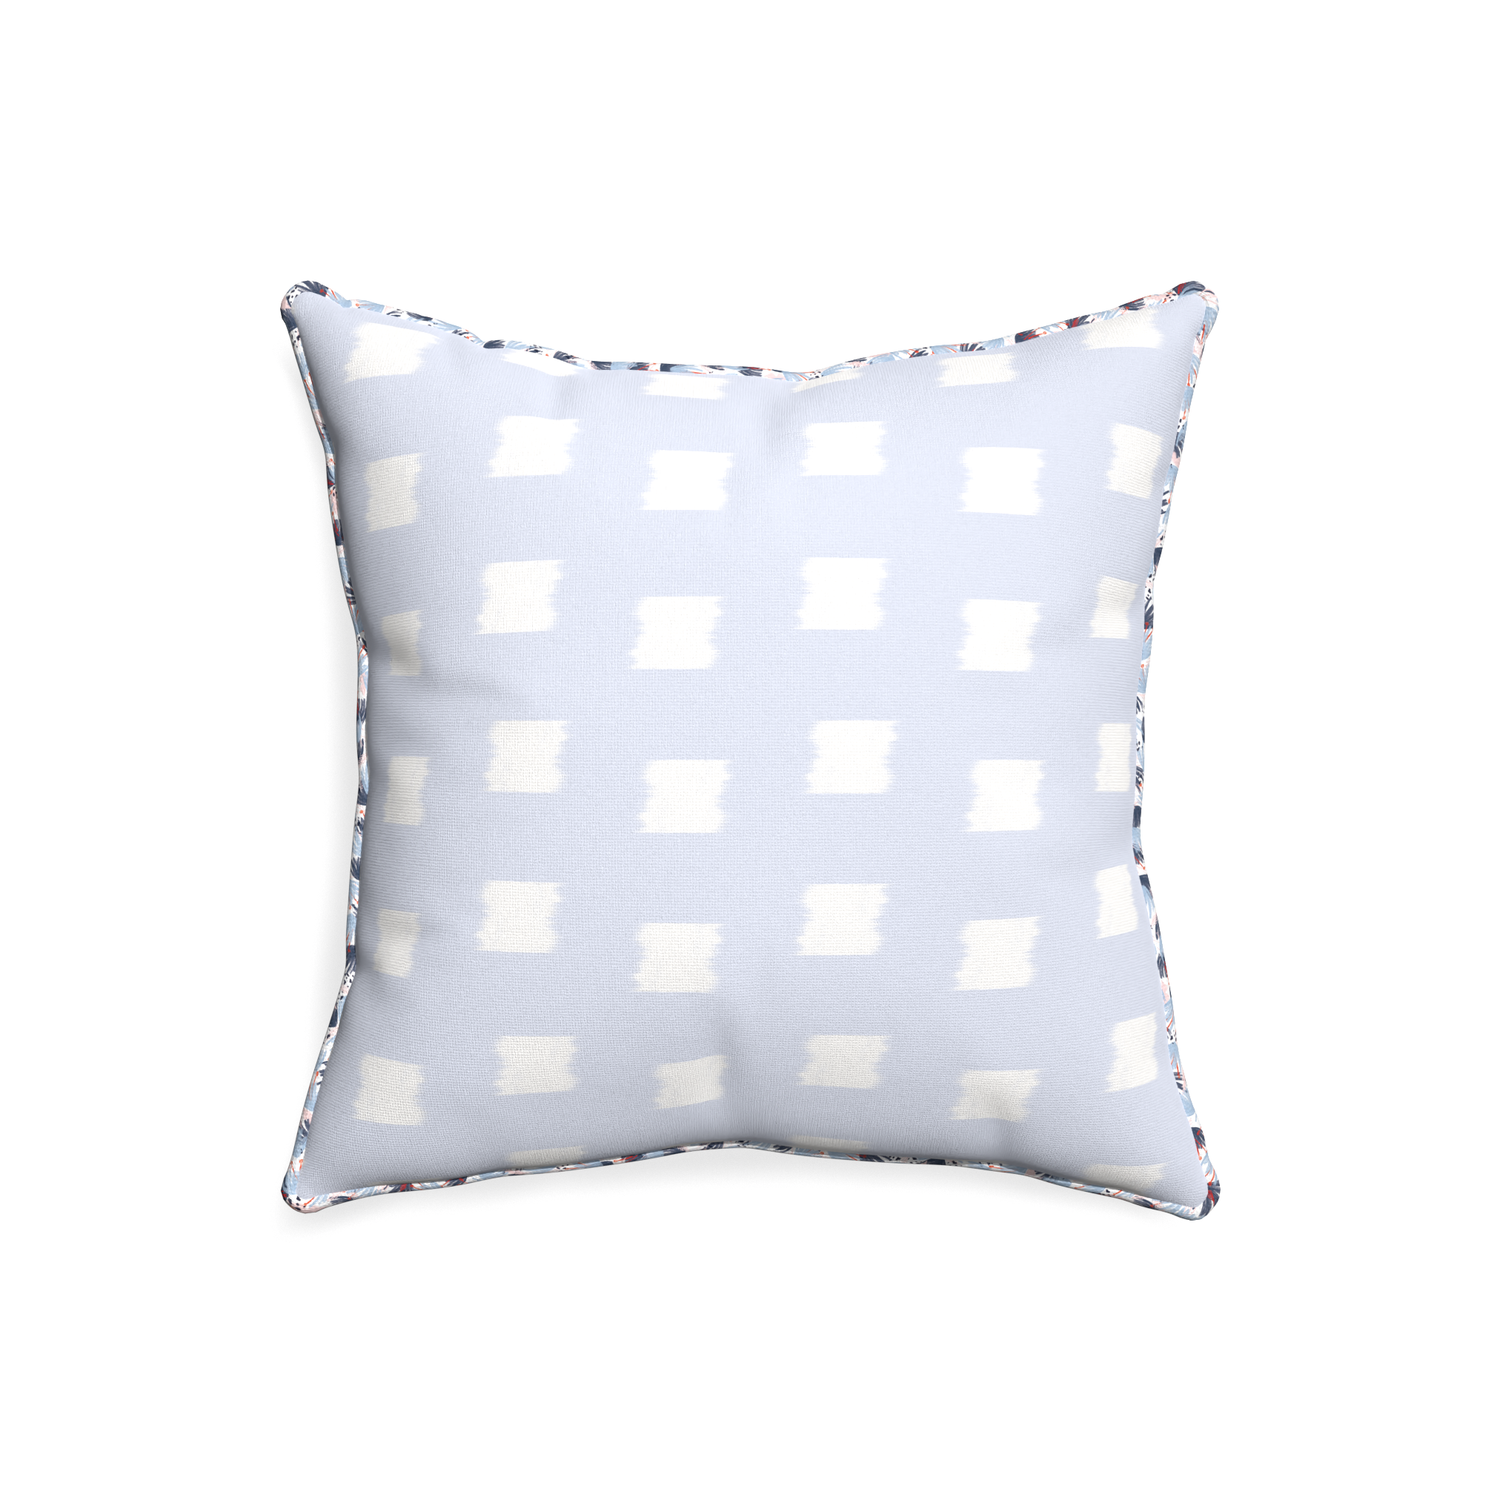 20-square denton custom sky blue patternpillow with e piping on white background